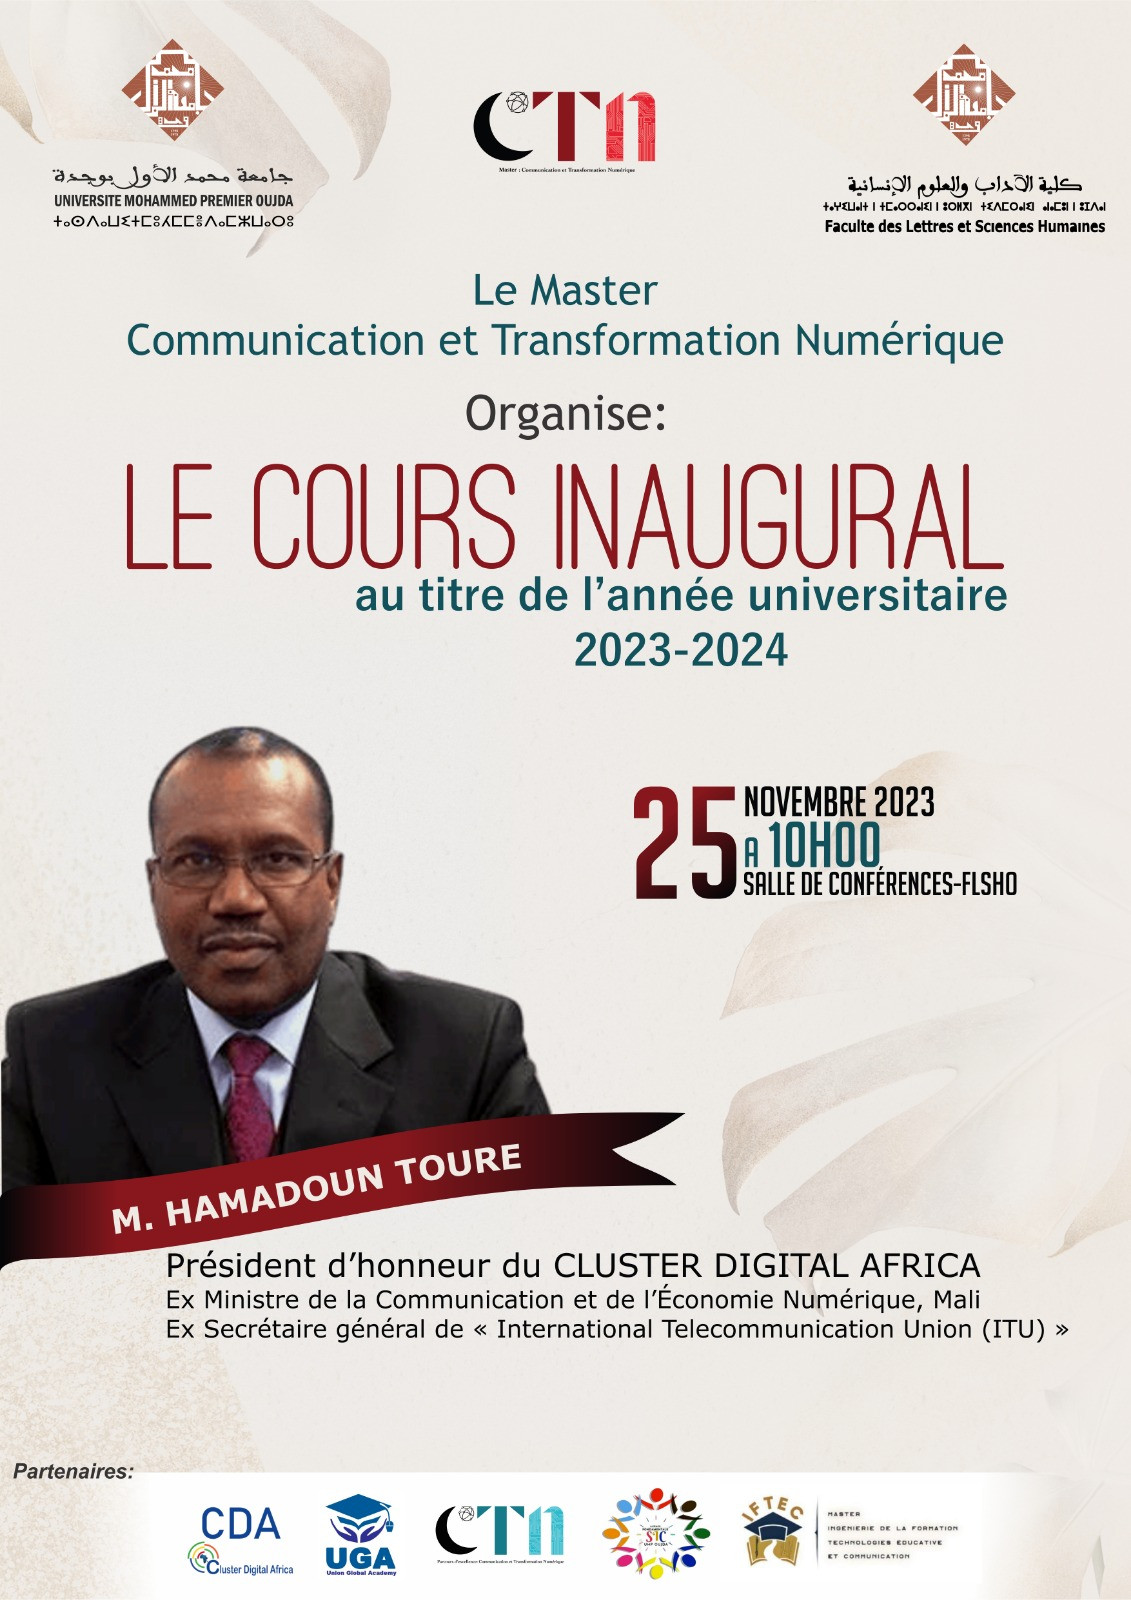 Cours Inaugural